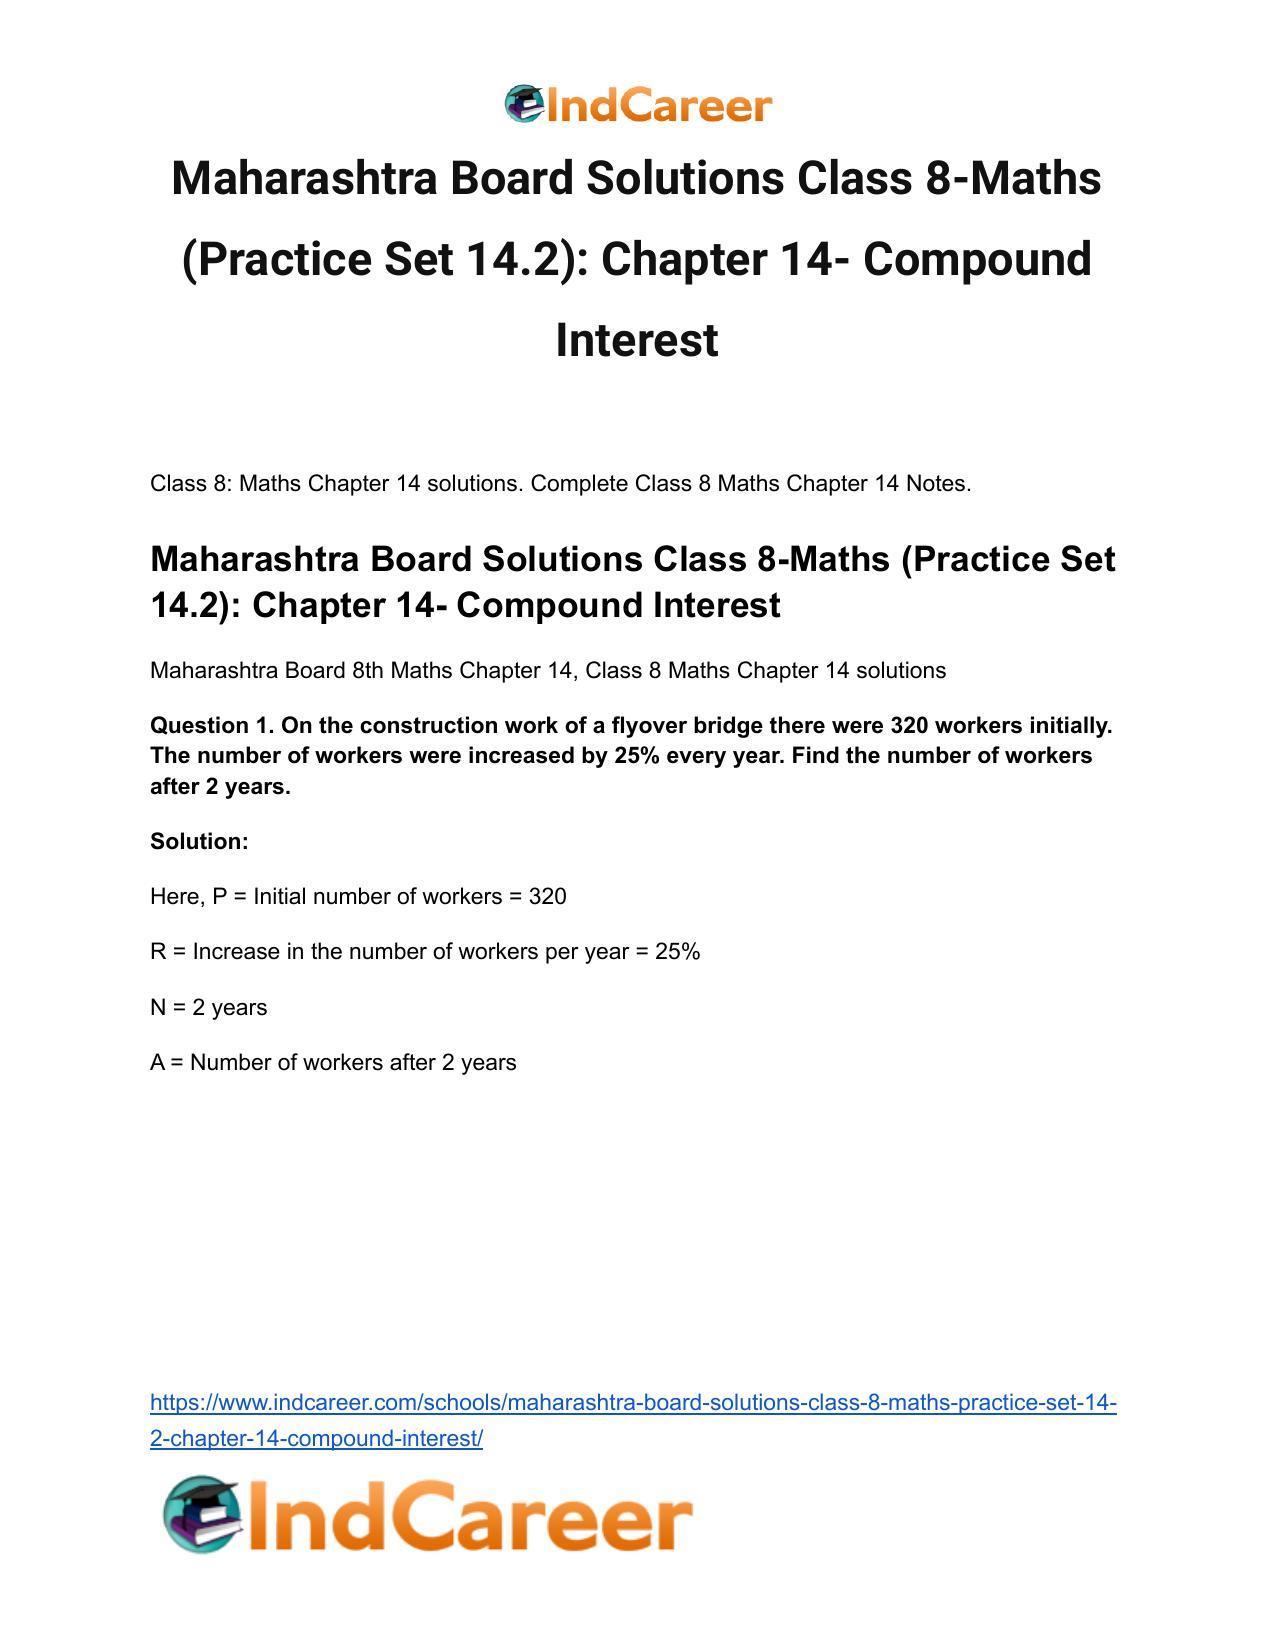 Maharashtra Board Solutions Class 8-Maths (Practice Set 14.2): Chapter 14- Compound Interest - Page 2